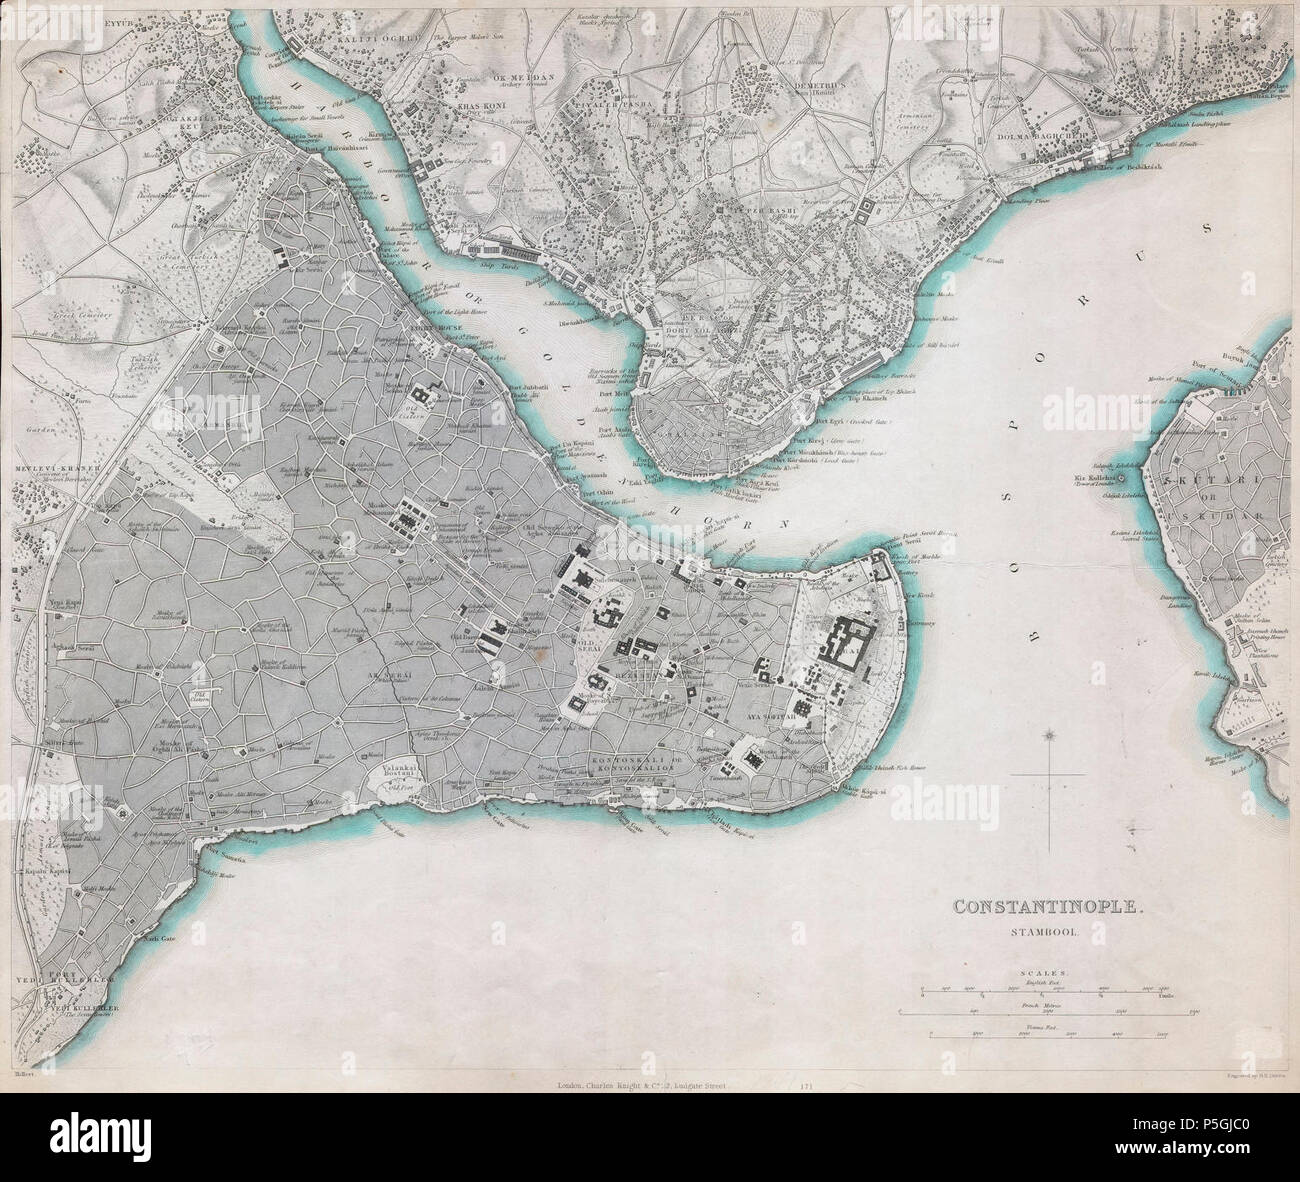 1840 S.D.U.K. Map of Constantinople ( Istanbul, Turkey ) - Geographicus - Istanbul-sduk-1841. Stock Photo